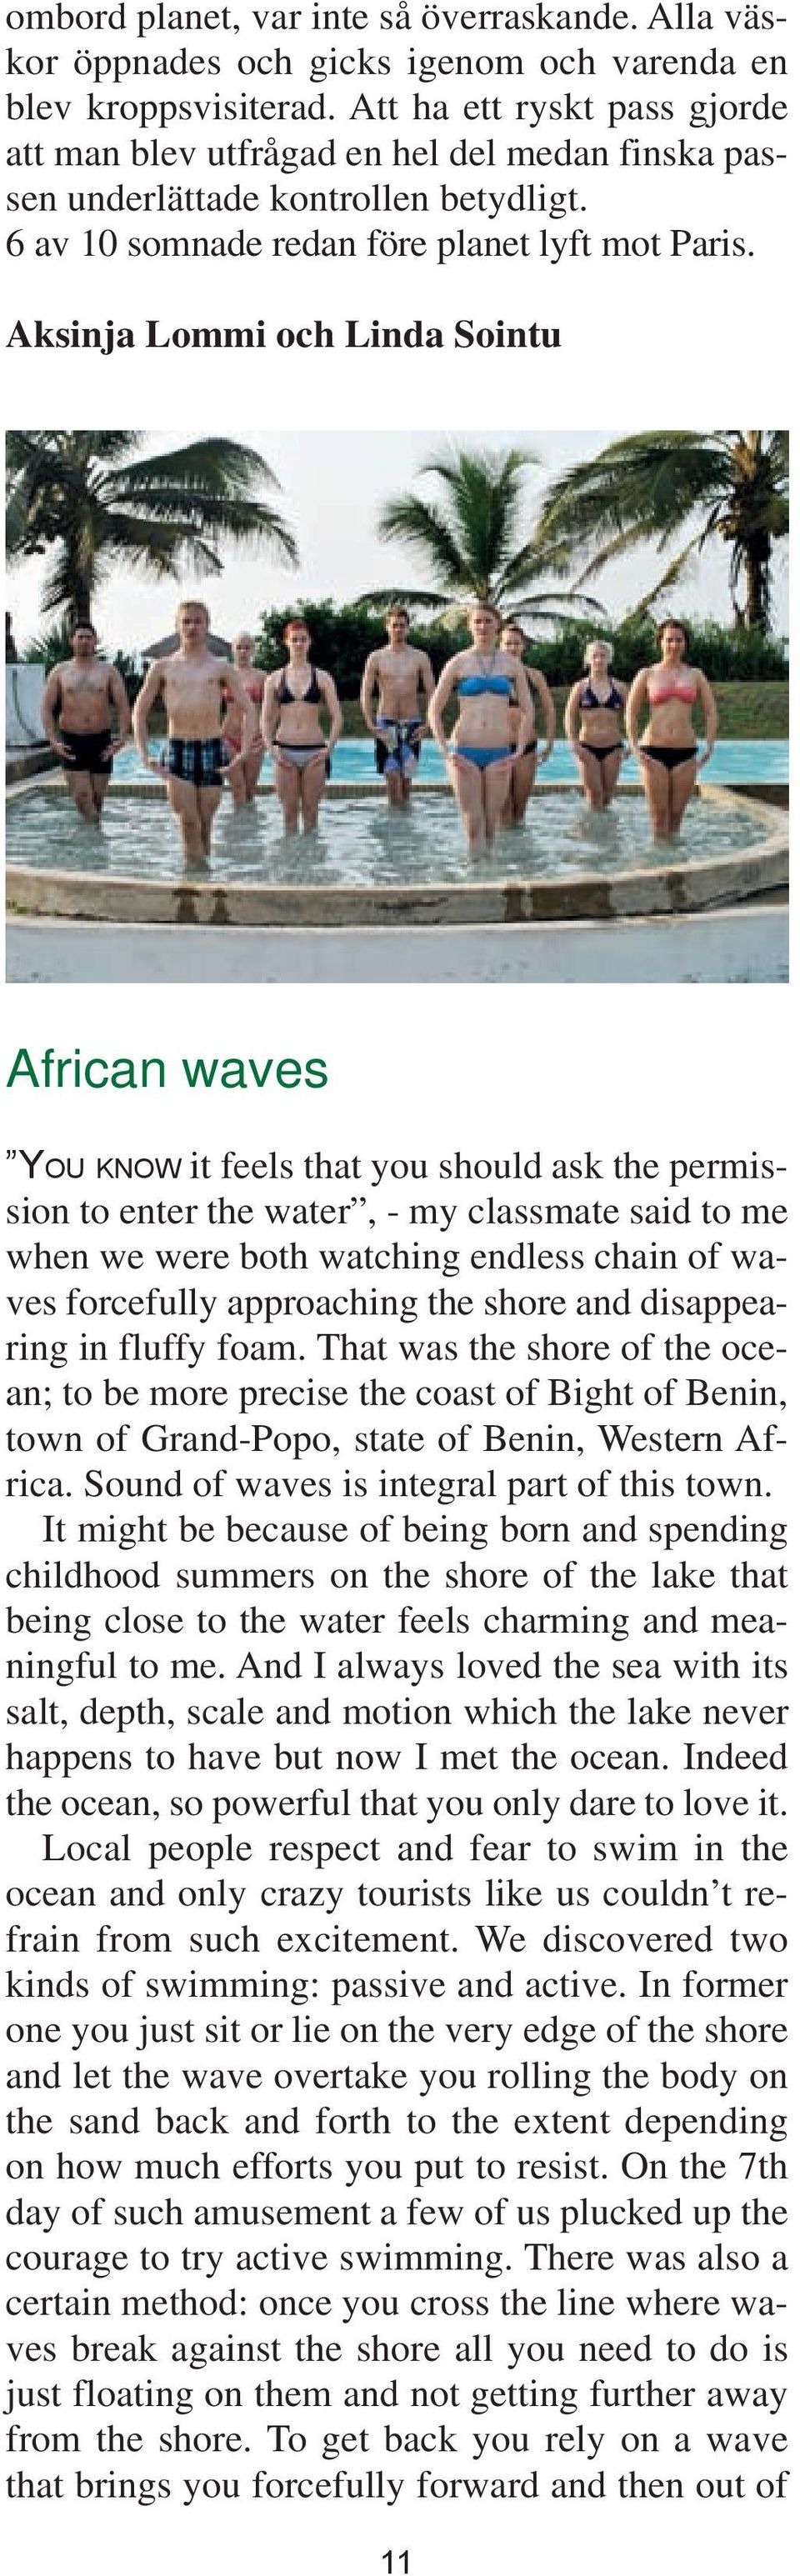 Aksinja Lommi och Linda Sointu African waves You know it feels that you should ask the permission to enter the water, - my classmate said to me when we were both watching endless chain of waves